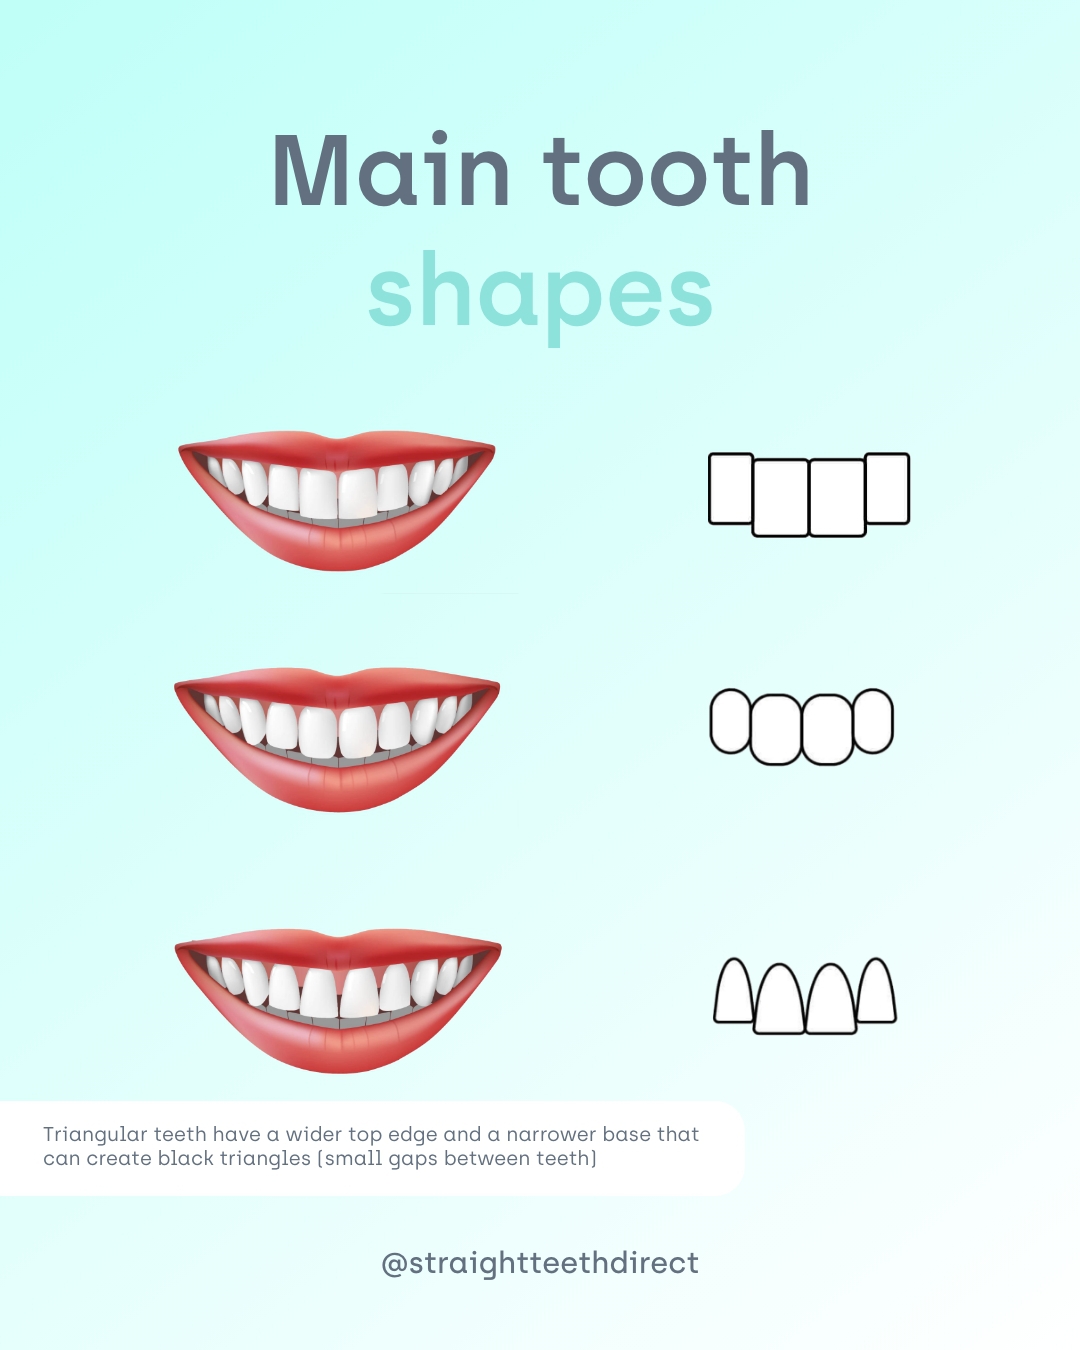 Main tooth shapes